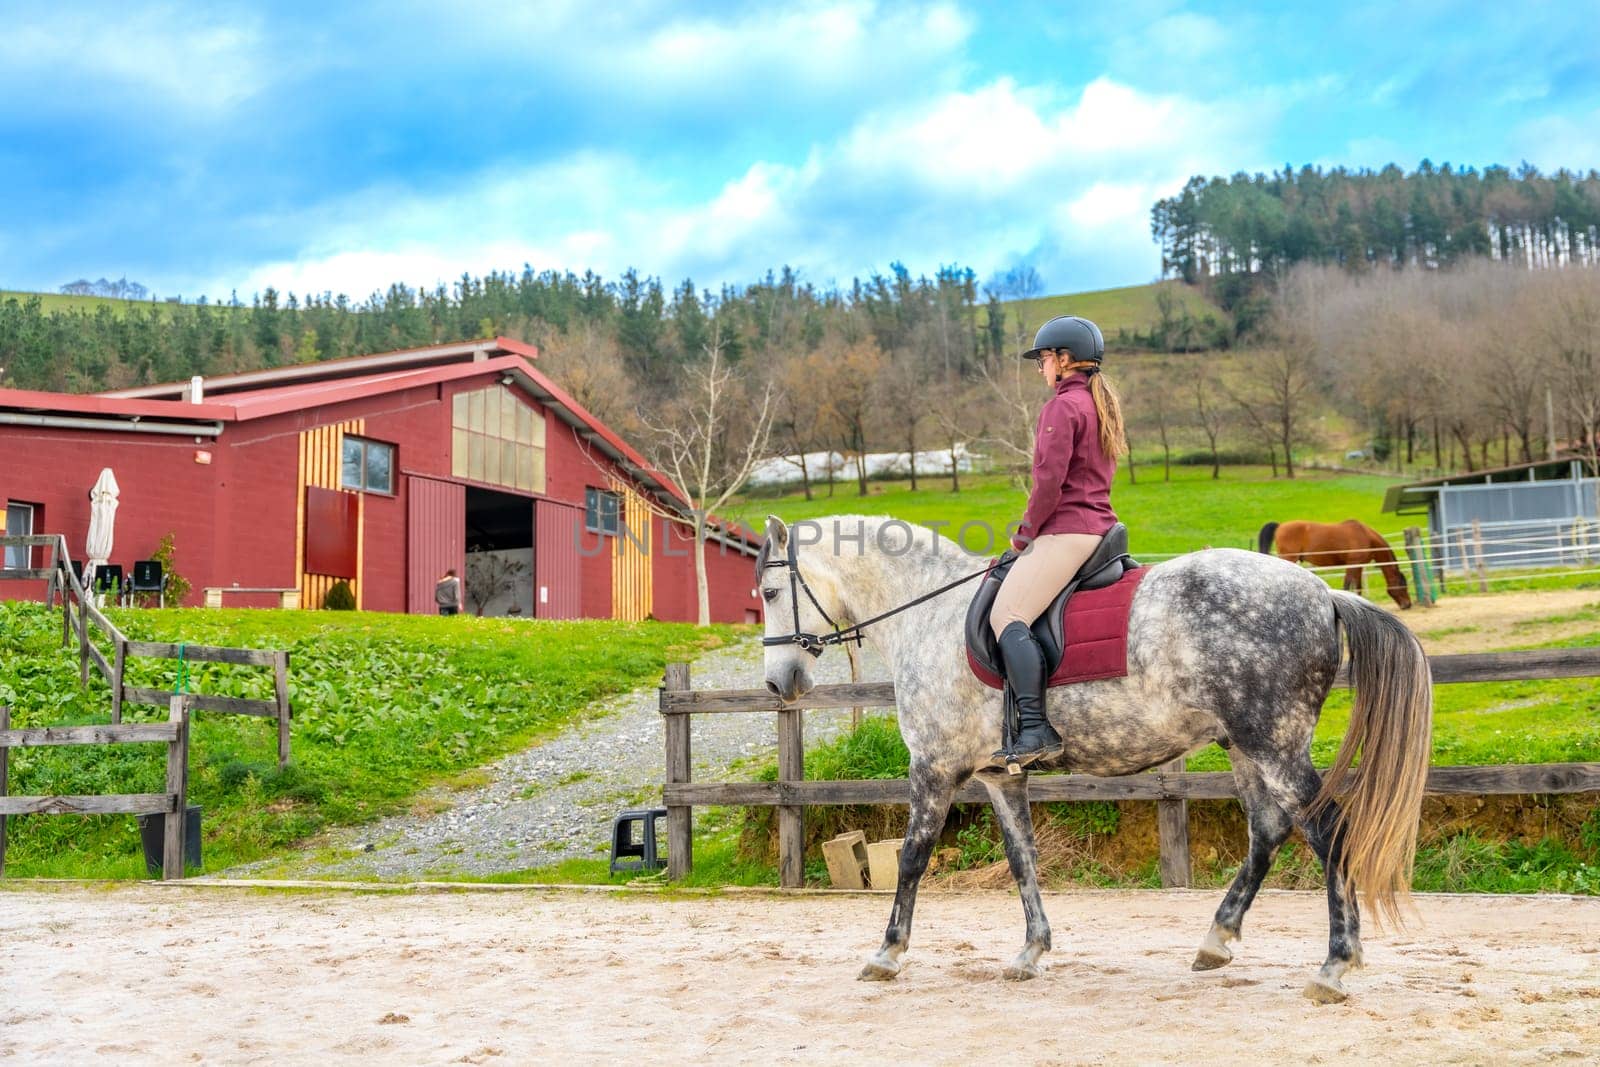 Wide view photo with copy space of a young female jockey training with her horse in an equestrian center